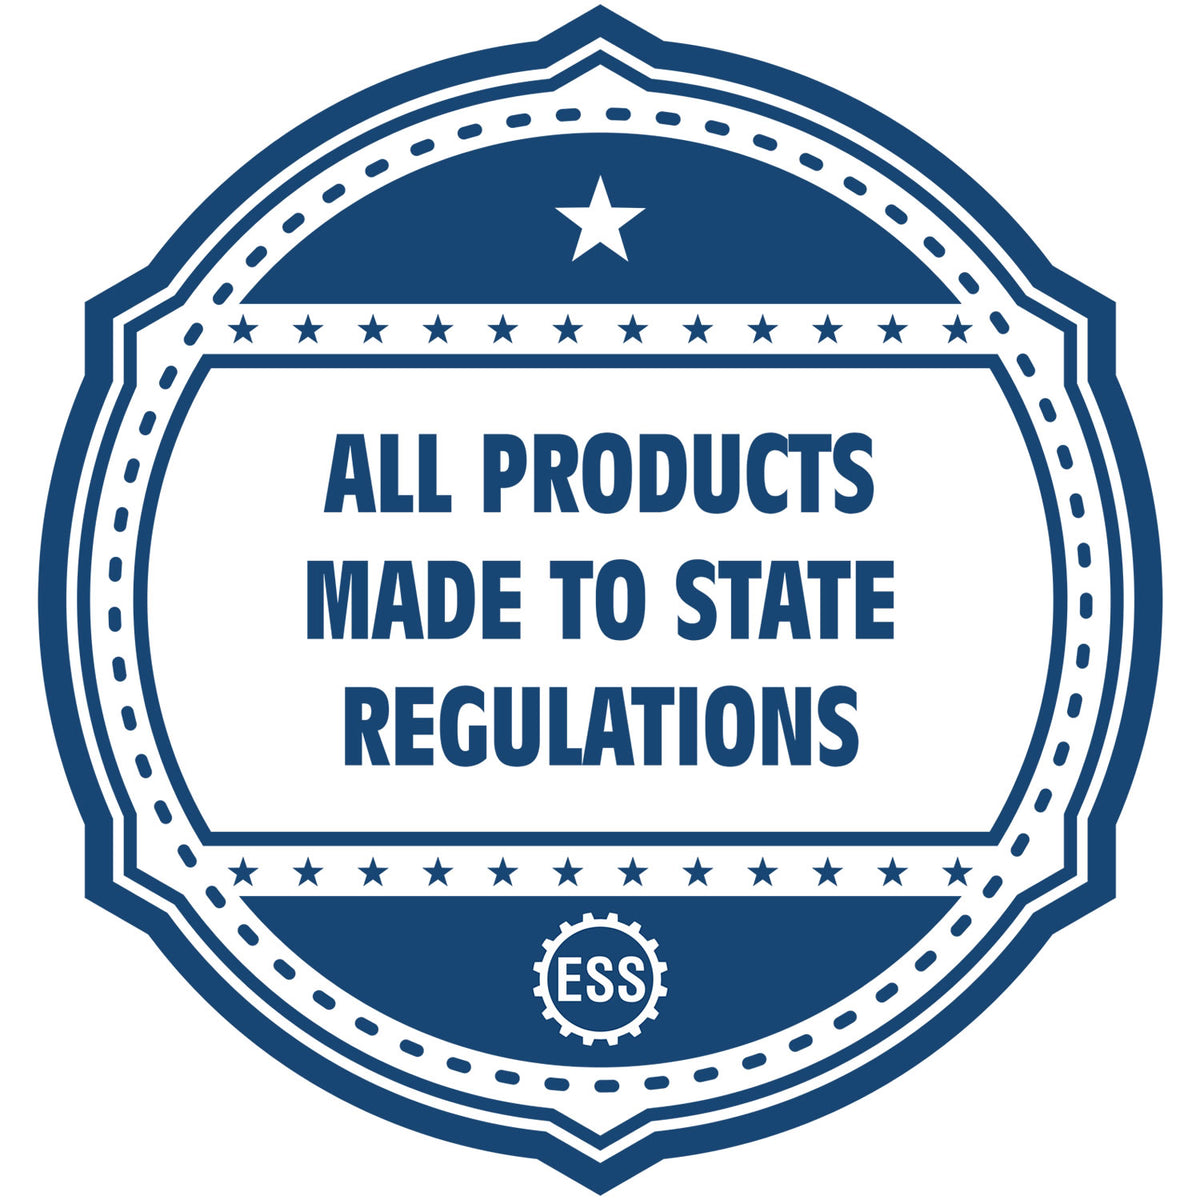 An icon or badge element for the Handheld Hawaii Architect Seal Embosser showing that this product is made in compliance with state regulations.